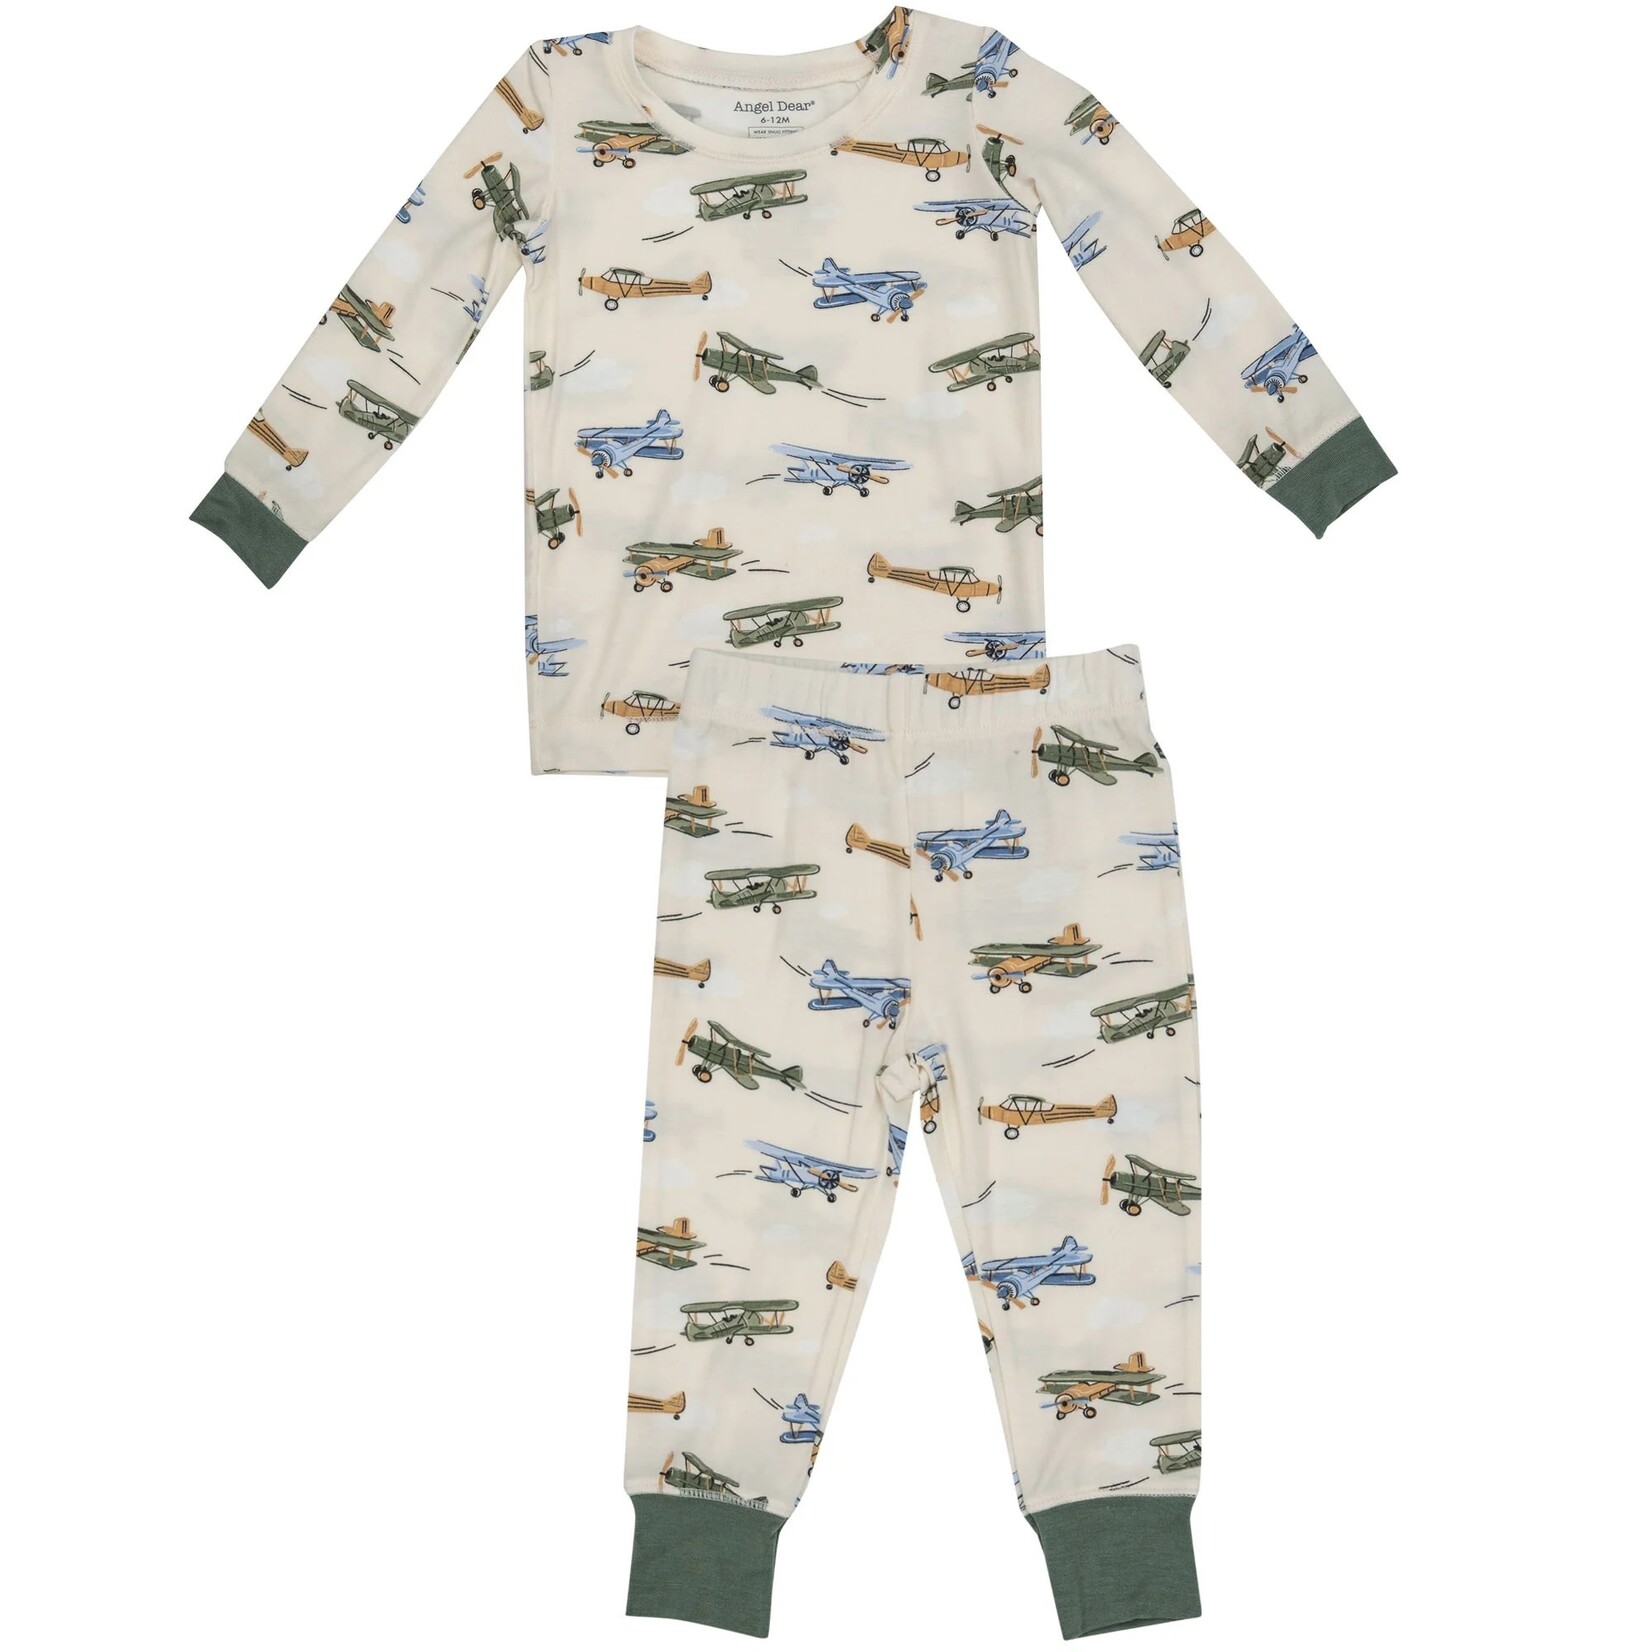 Angel Dear Bamboo Toddler Lounge Set - Vintage Airplanes